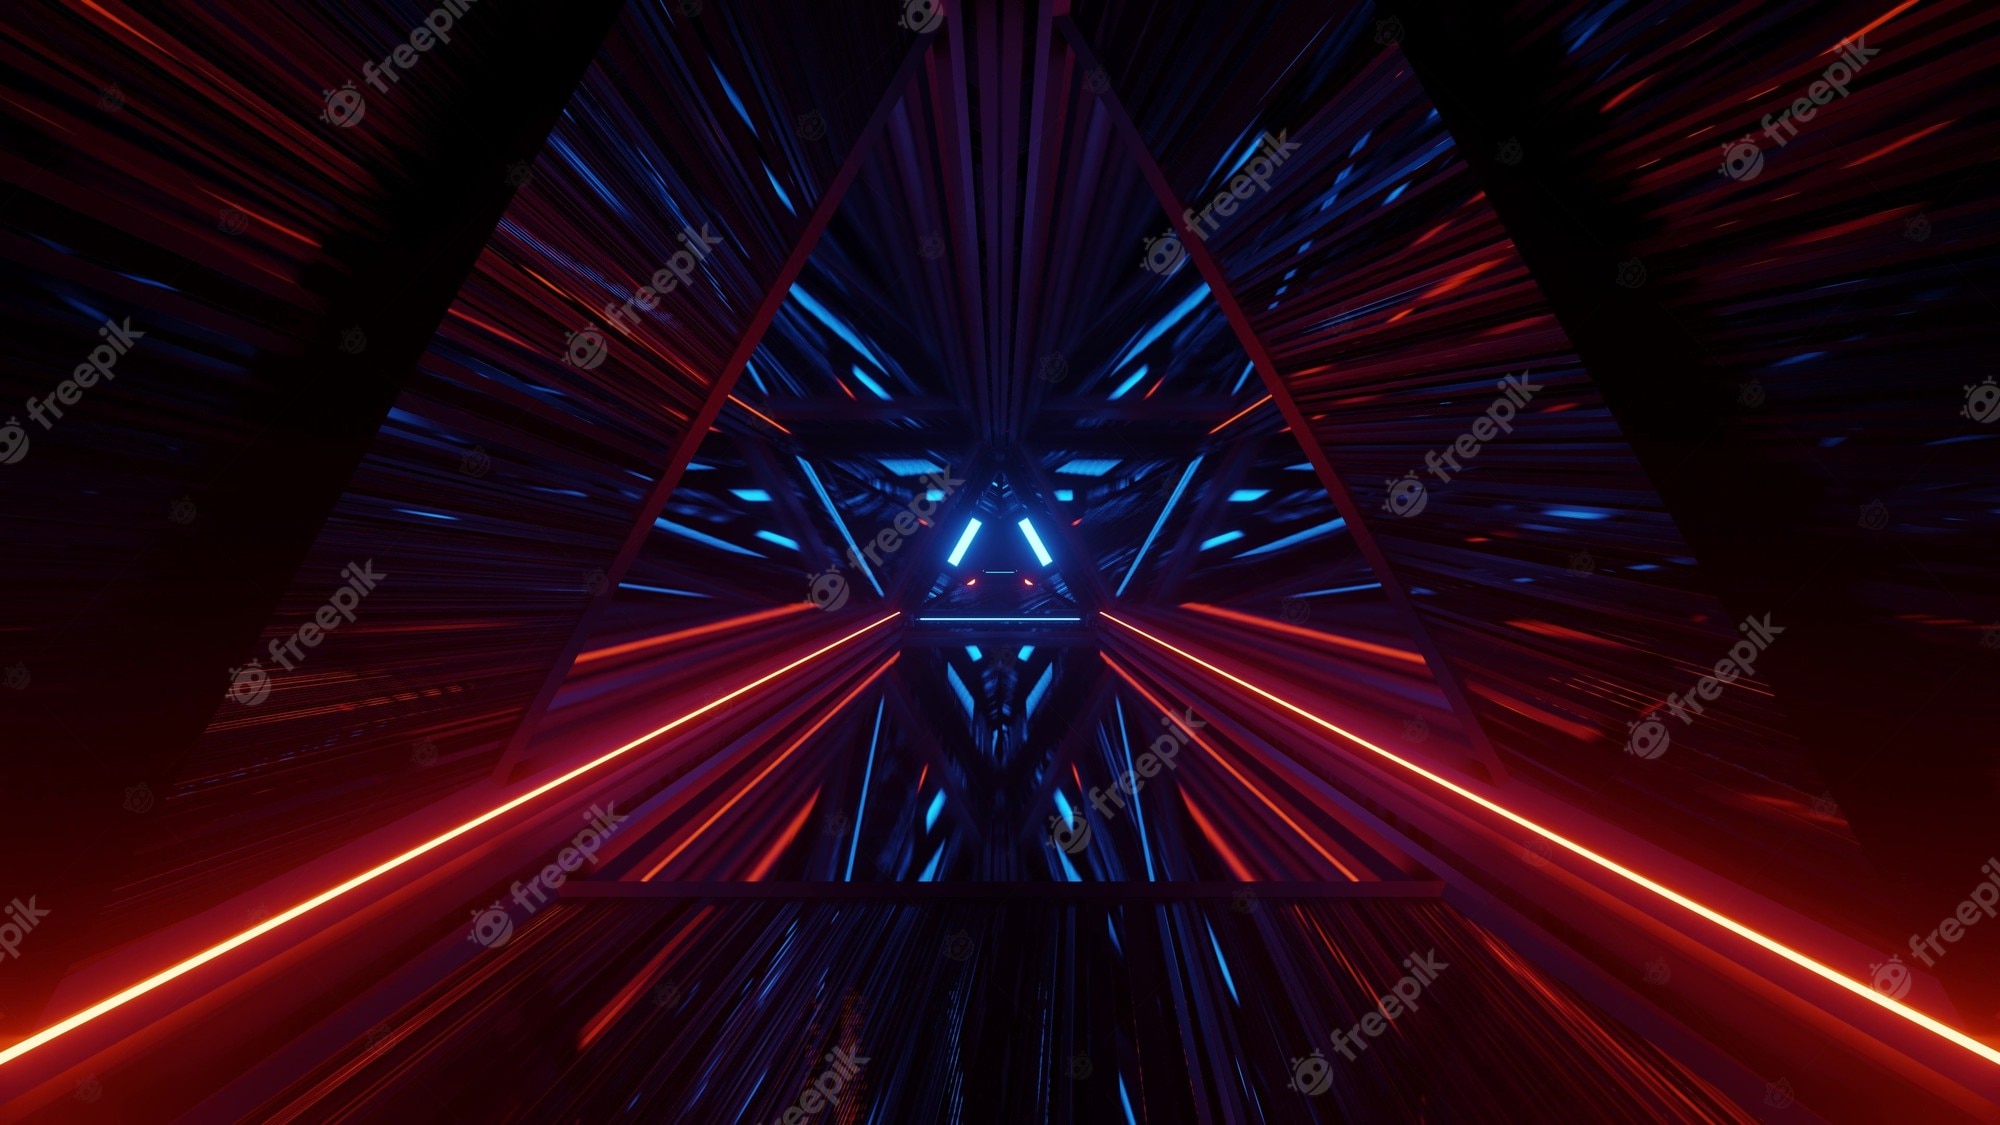 Premium Photod illustration of abstract background with endless triangle shaped corridor with red and blue neon lights in 4k uhd